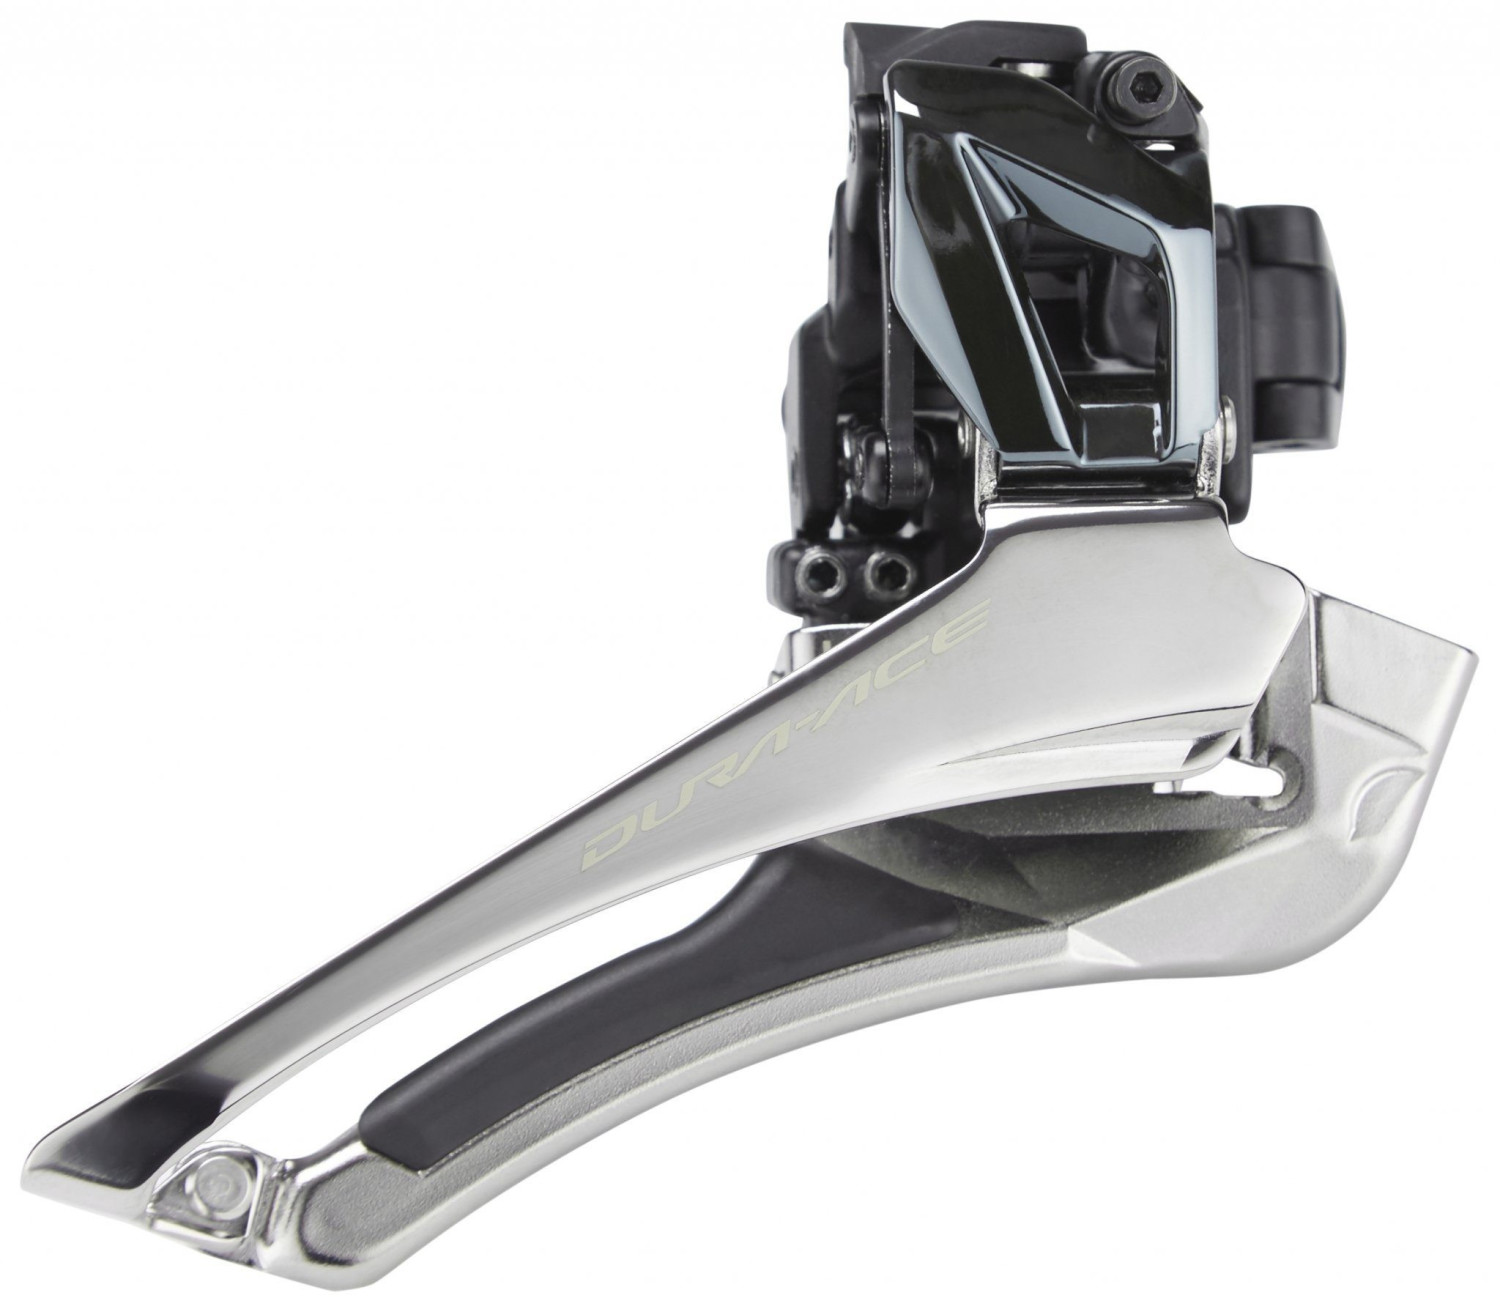 Buy Shimano Dura Ace FD-R9100 from £39.95 (Today) – Best Deals on